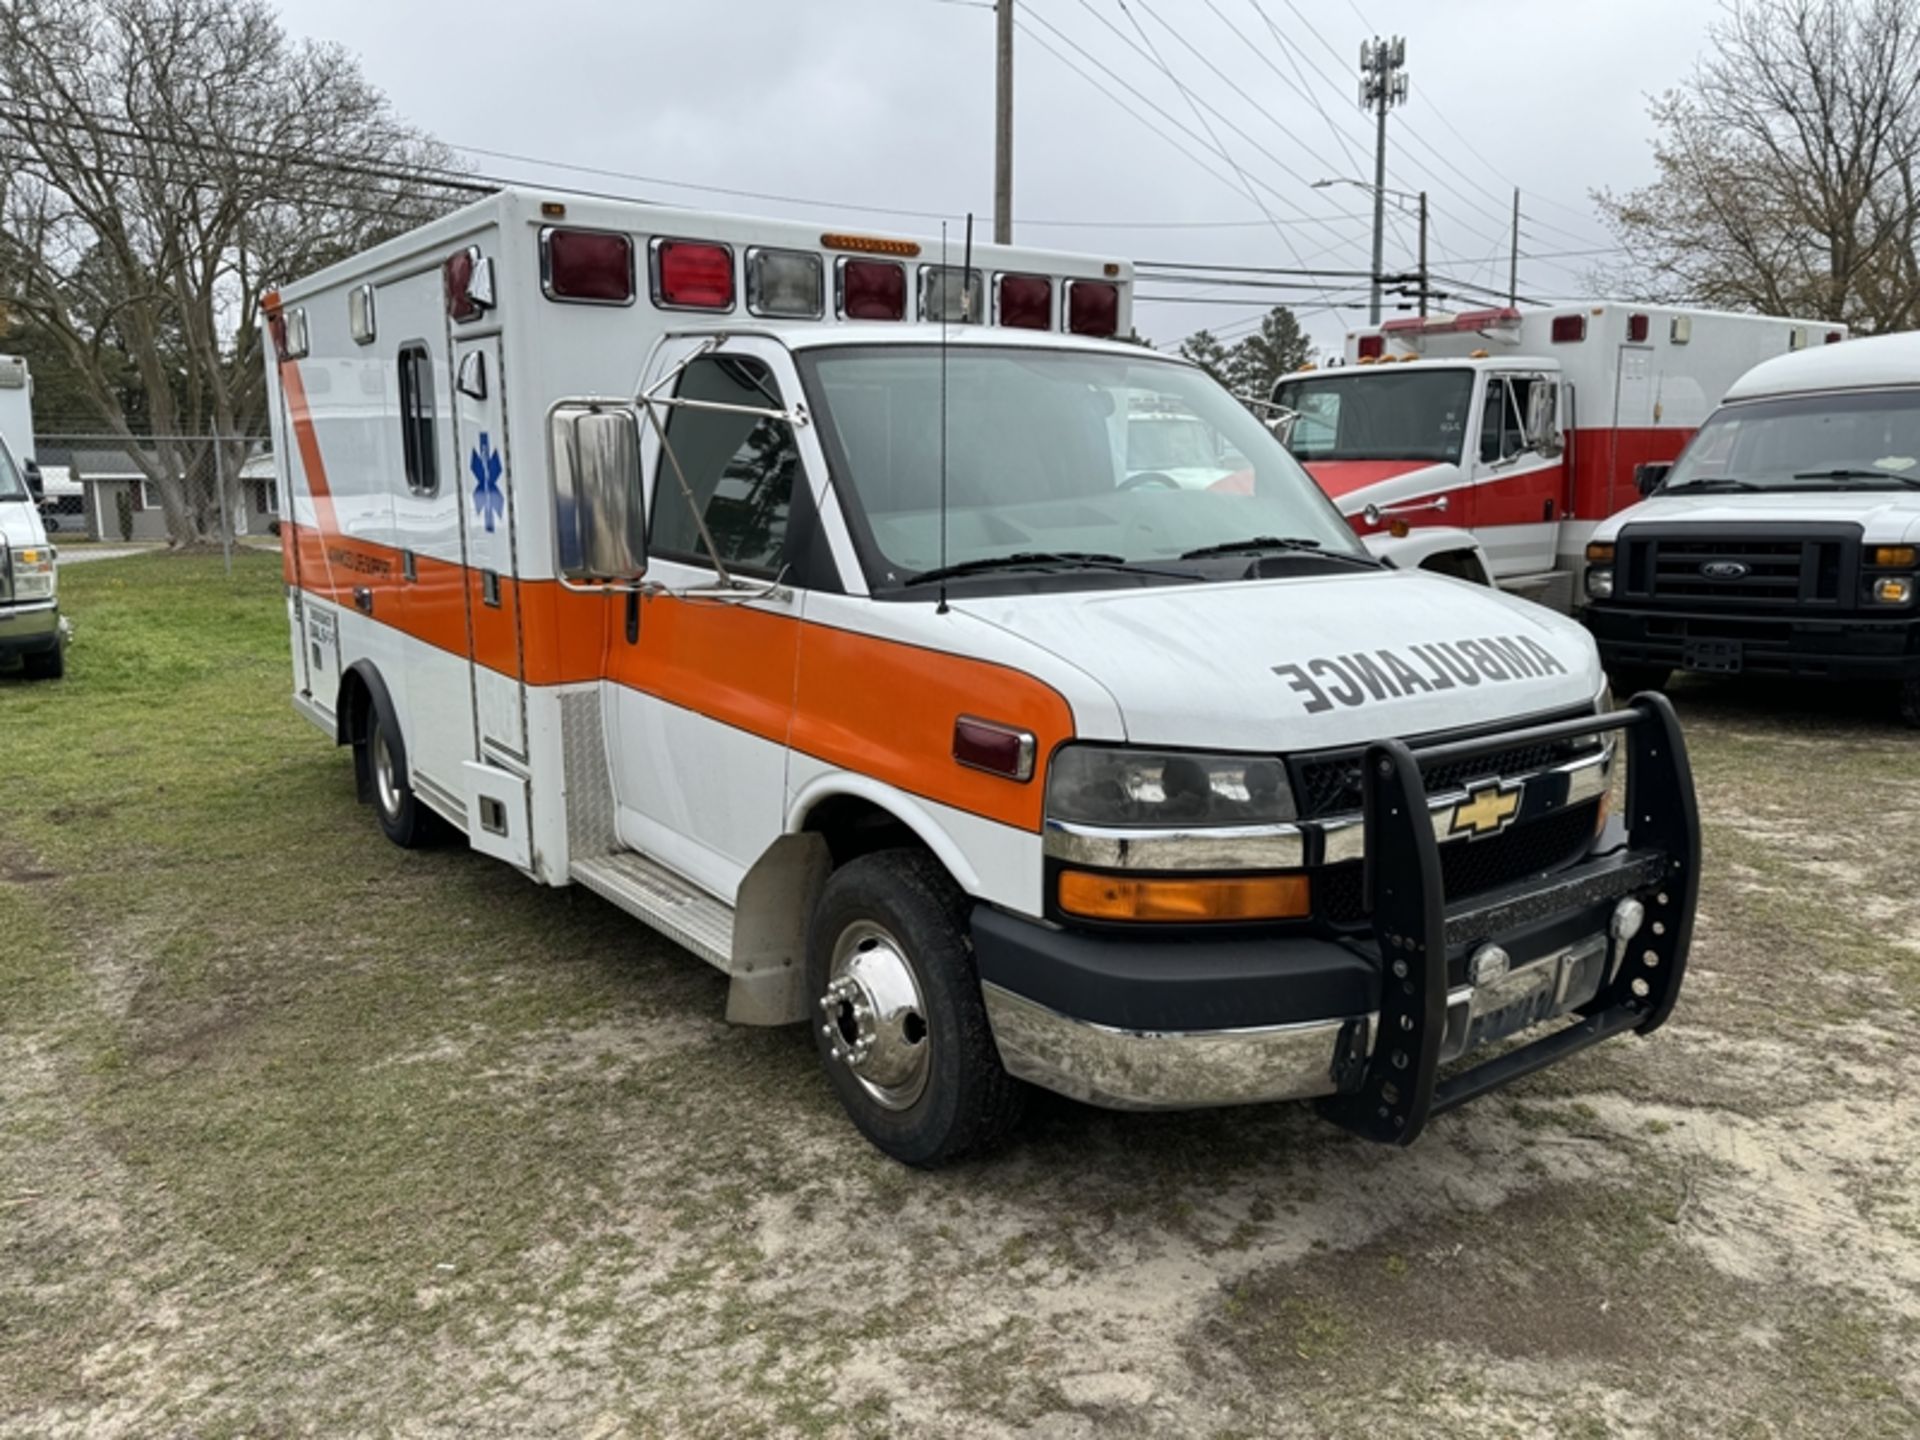 2009 CHEVROLET Ambulance, dsl - 225,093 miles showing - 1GBJG316X91122378 - Image 2 of 6